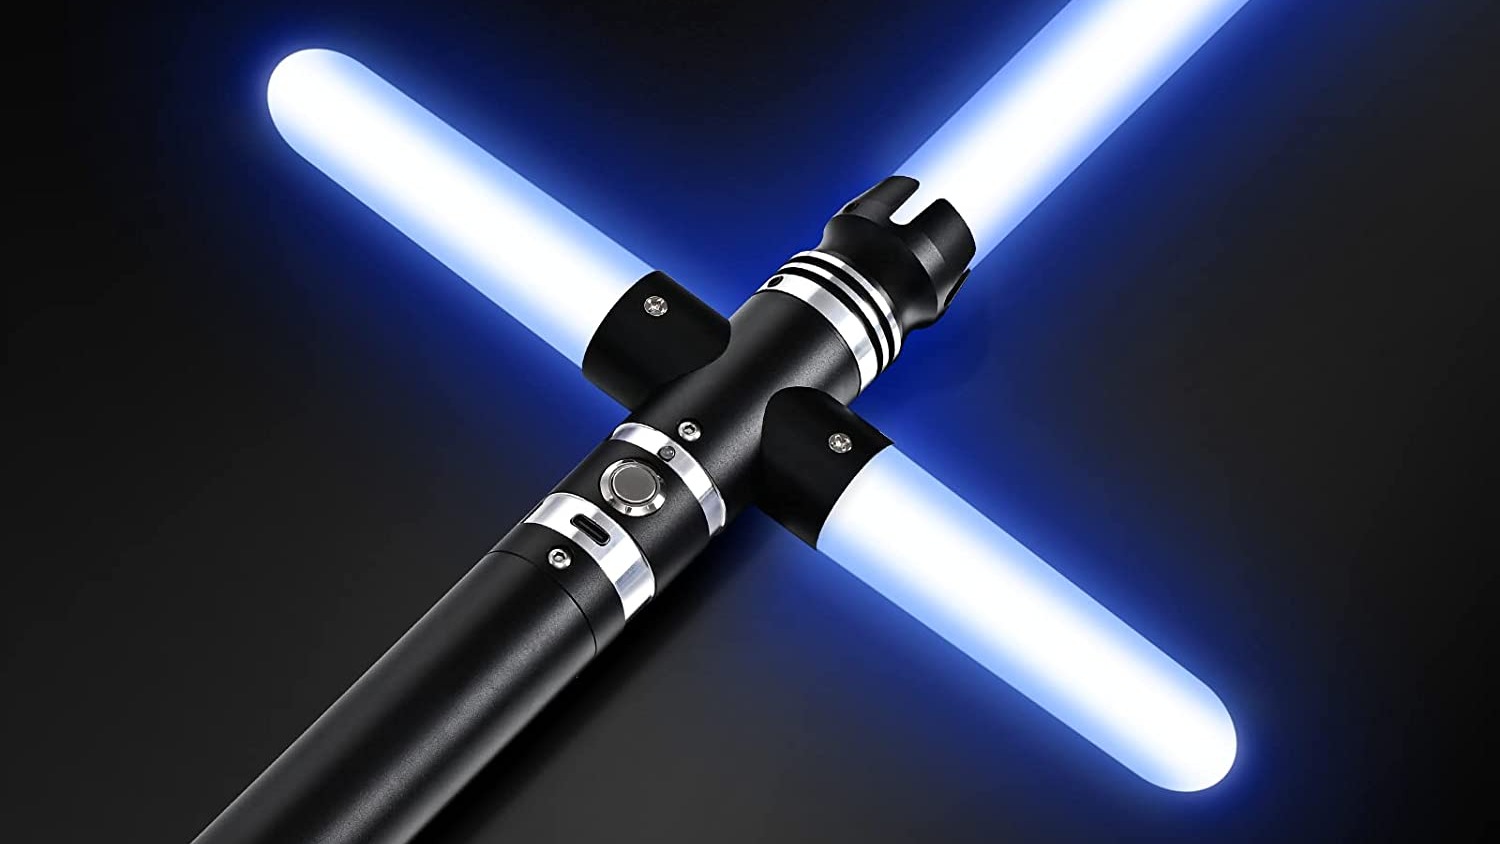 Use the Force and save up to 84% on Star Wars lightsaber gifts for Cyber Monday